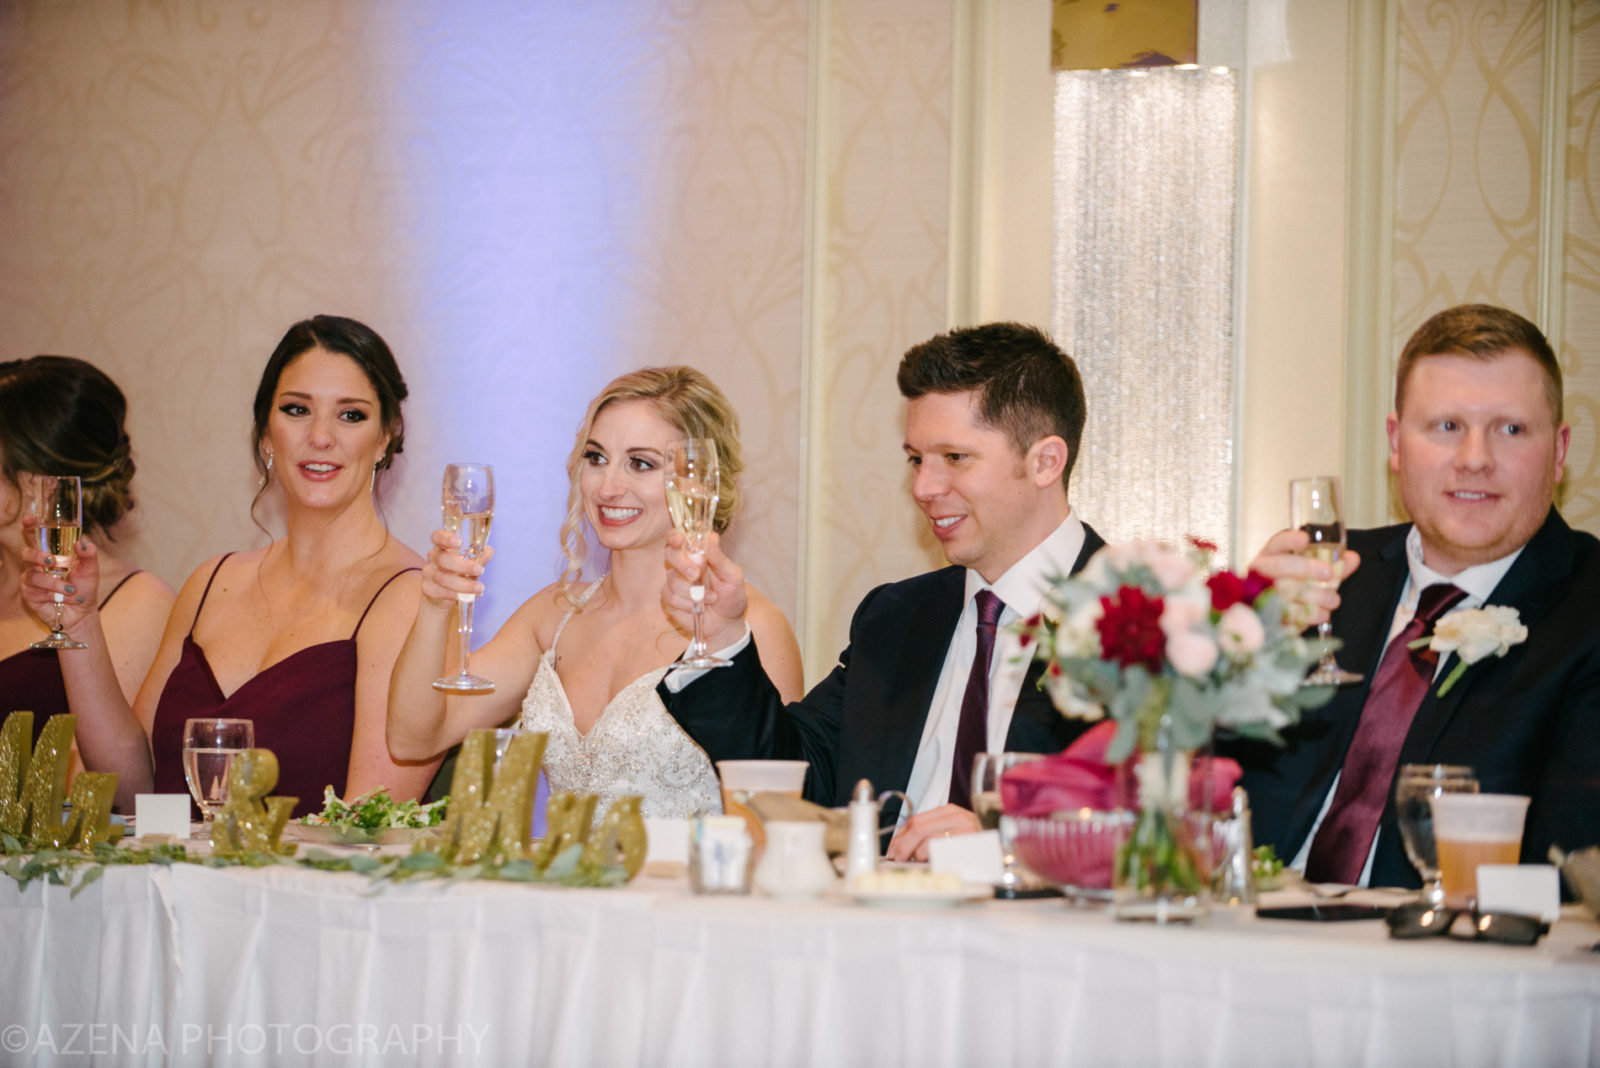 Bride and groom at head table